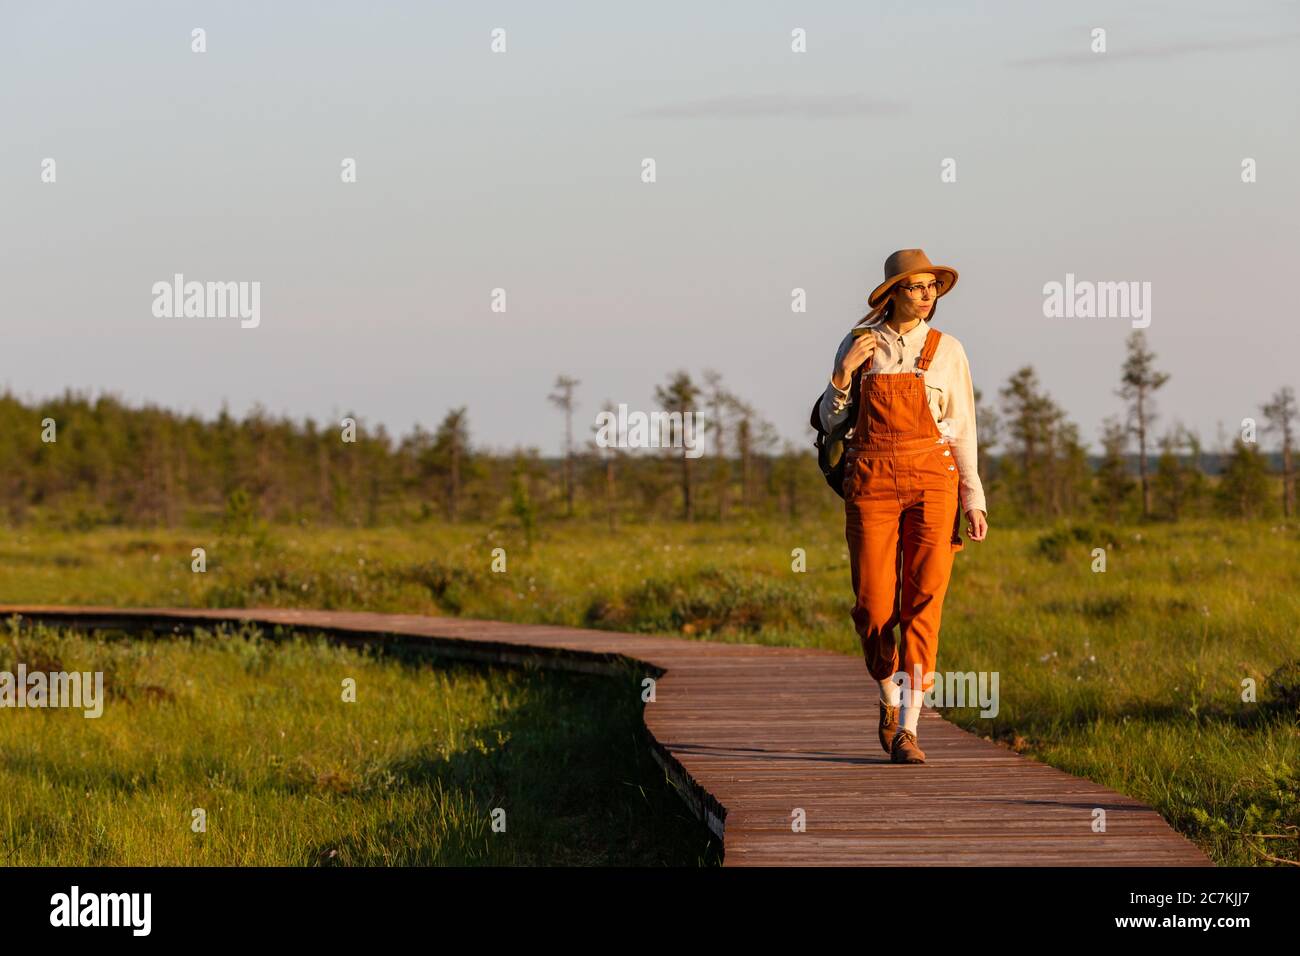 Woman botanist with backpack on ecological hiking trail in summer outdoors. Naturalist exploring wildlife and ecotourism adventure walking on path thr Stock Photo